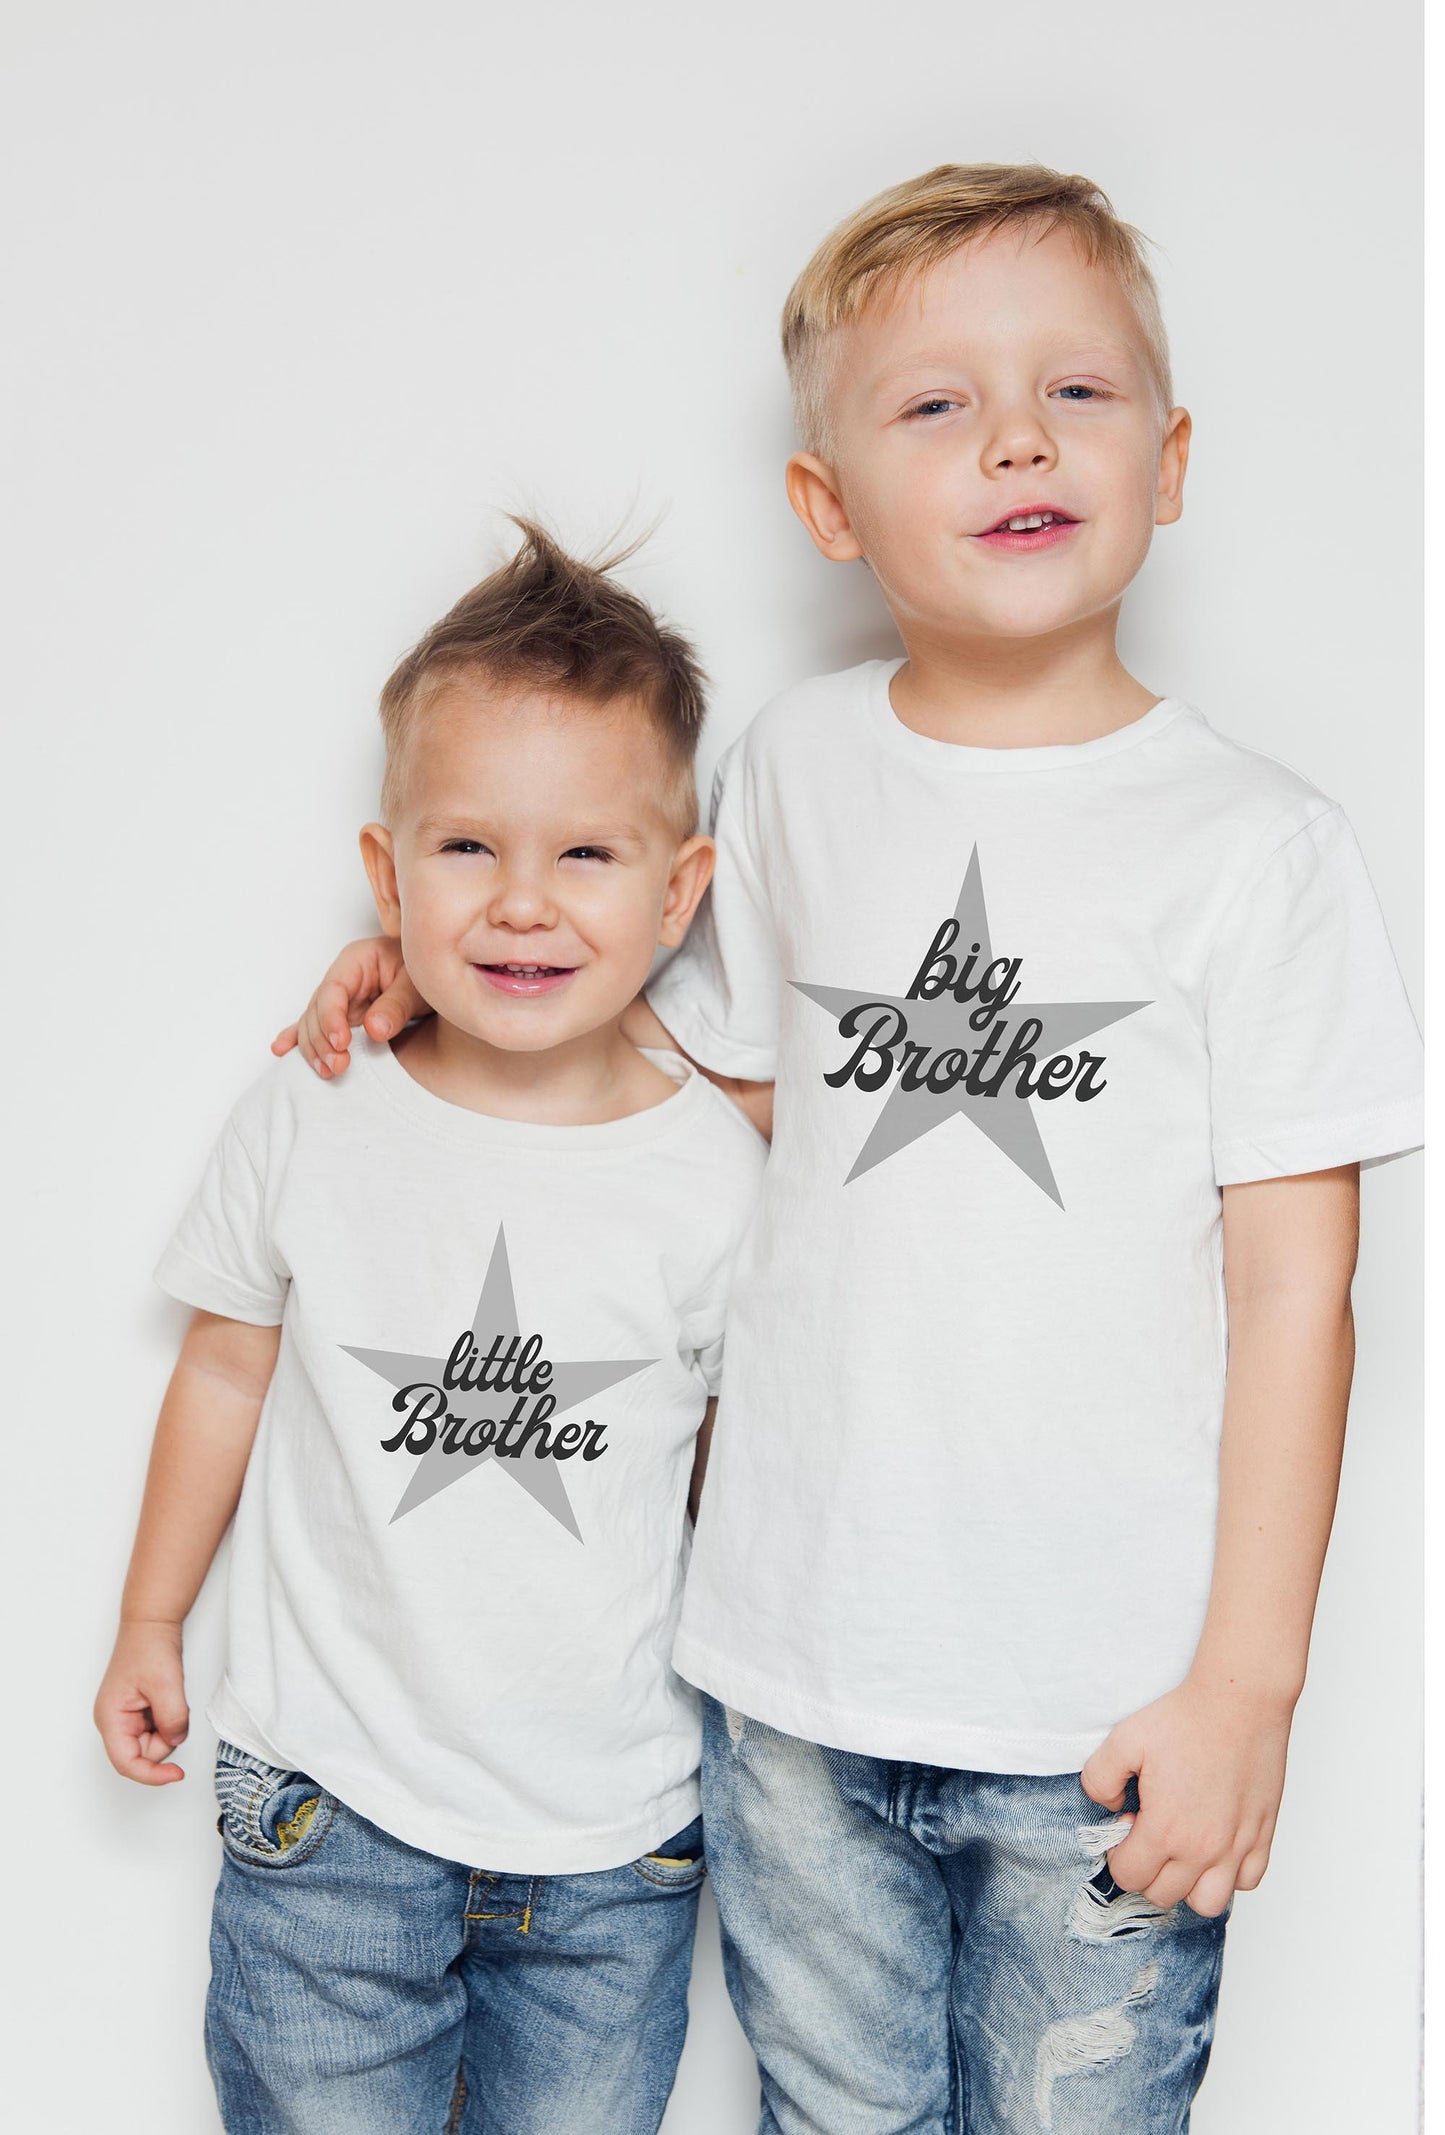 Cotton Kids T shirt for Brothers